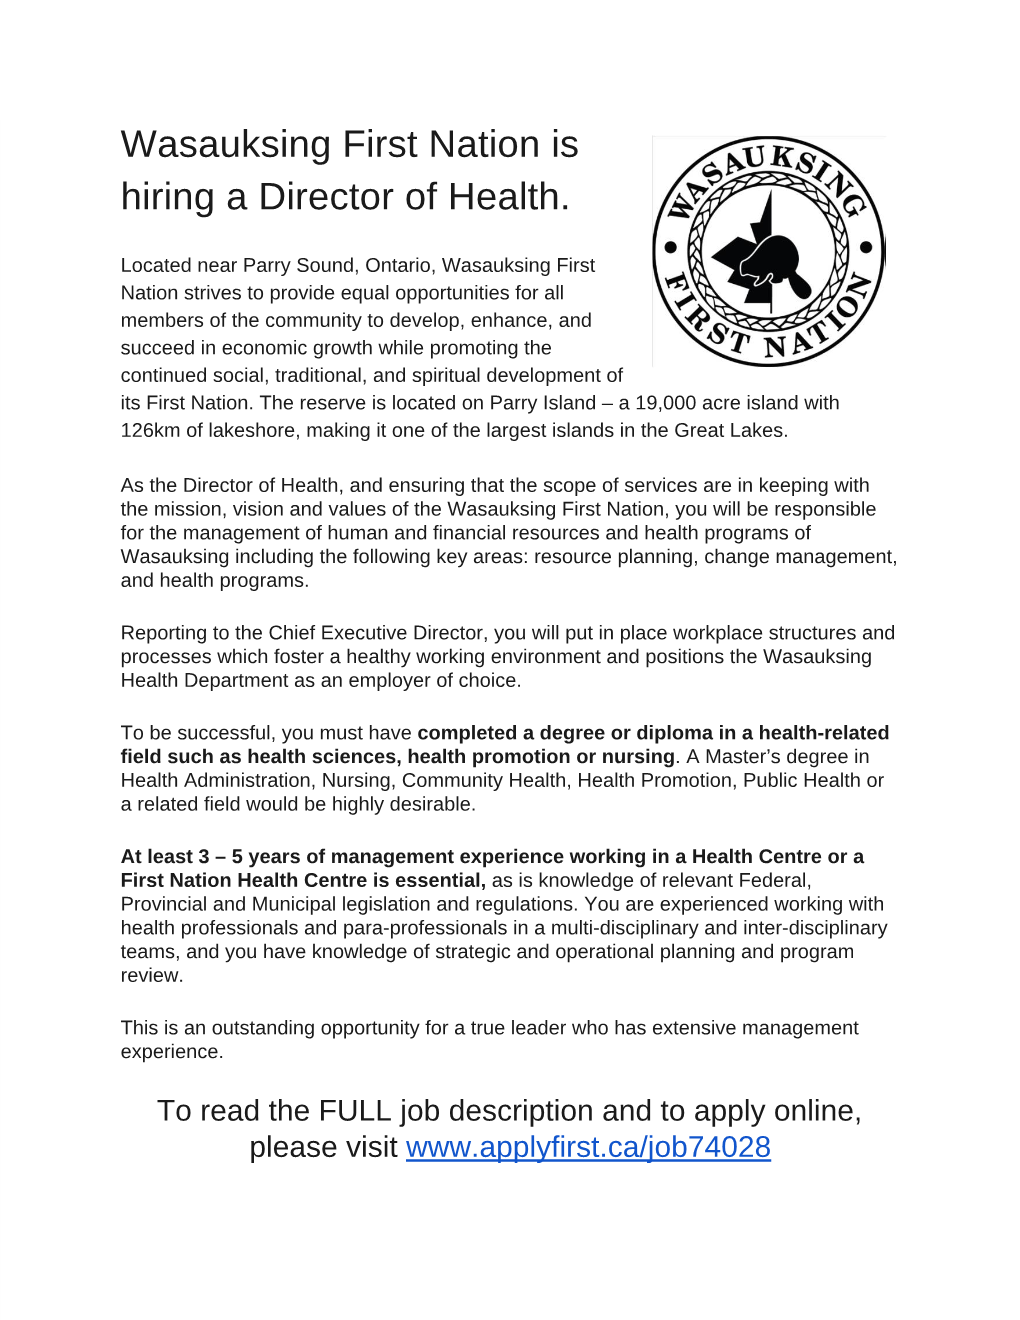 Wasauksing First Nation Is Hiring a Director of Health